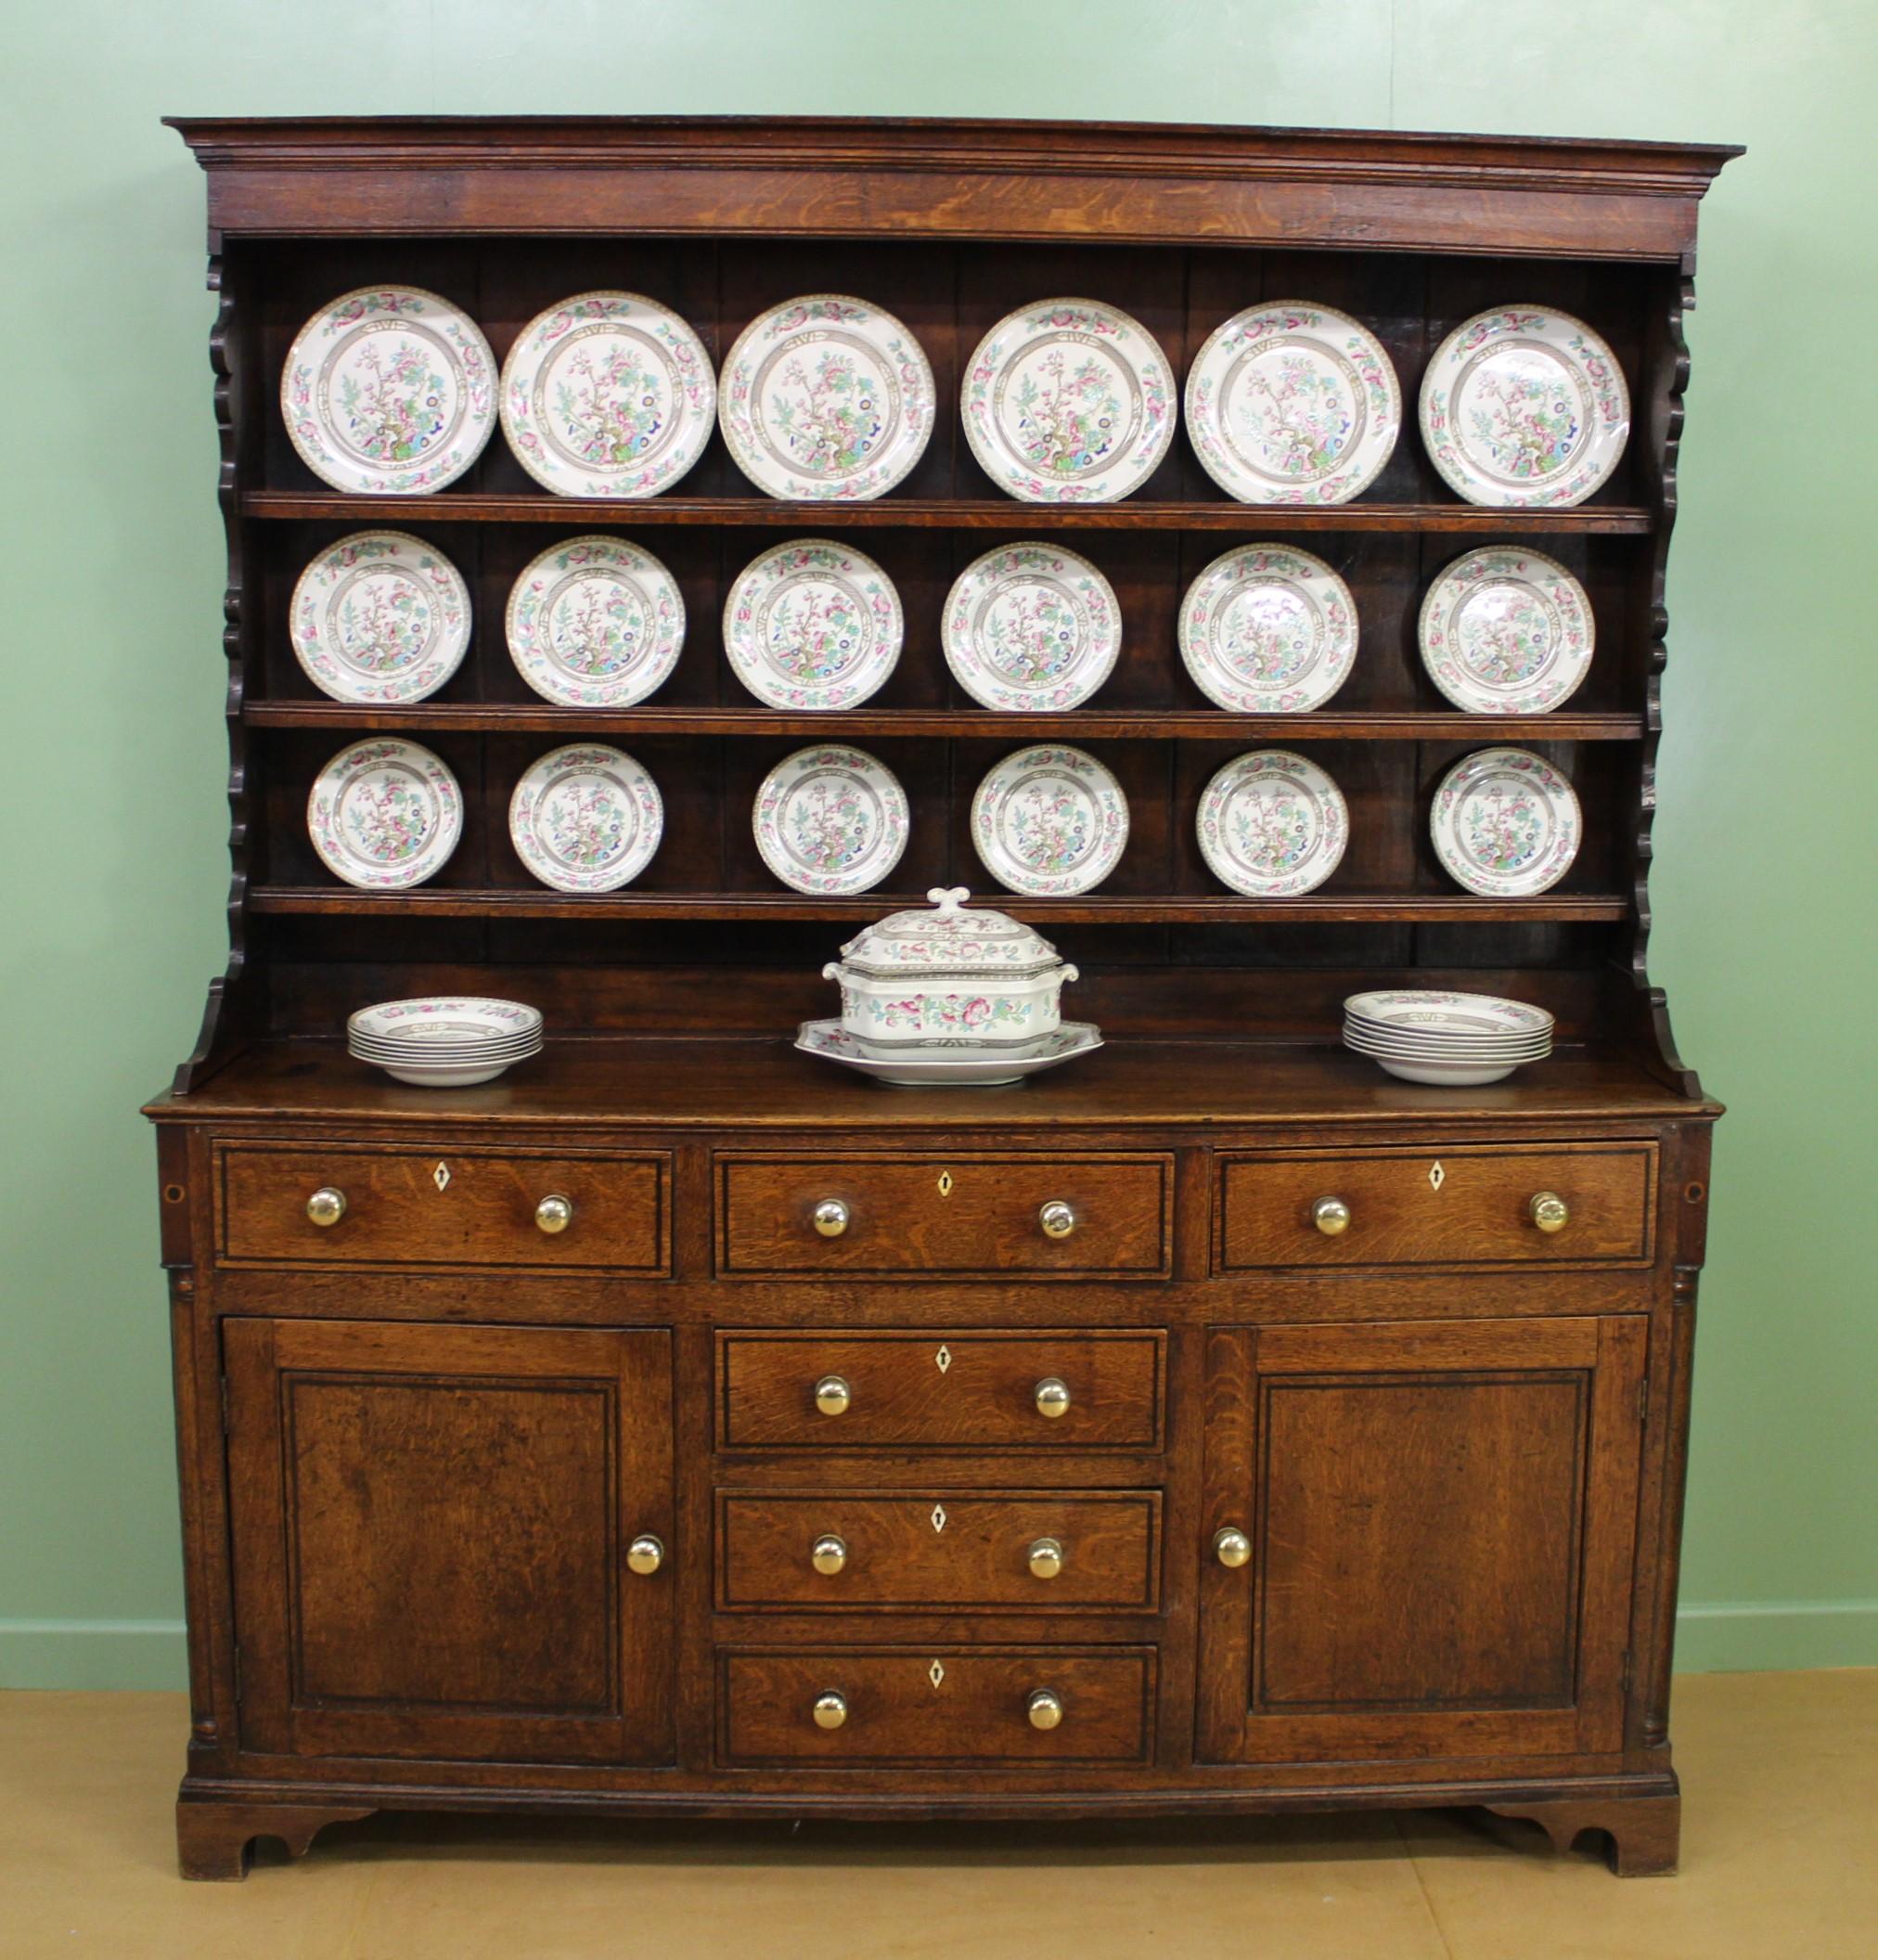 A charming early 19th century English oak dresser. Well constructed in solid oak and with pine drawer linings and back boards. In very good original condition with a great mellow color and patina. The base section with a series of drawers and